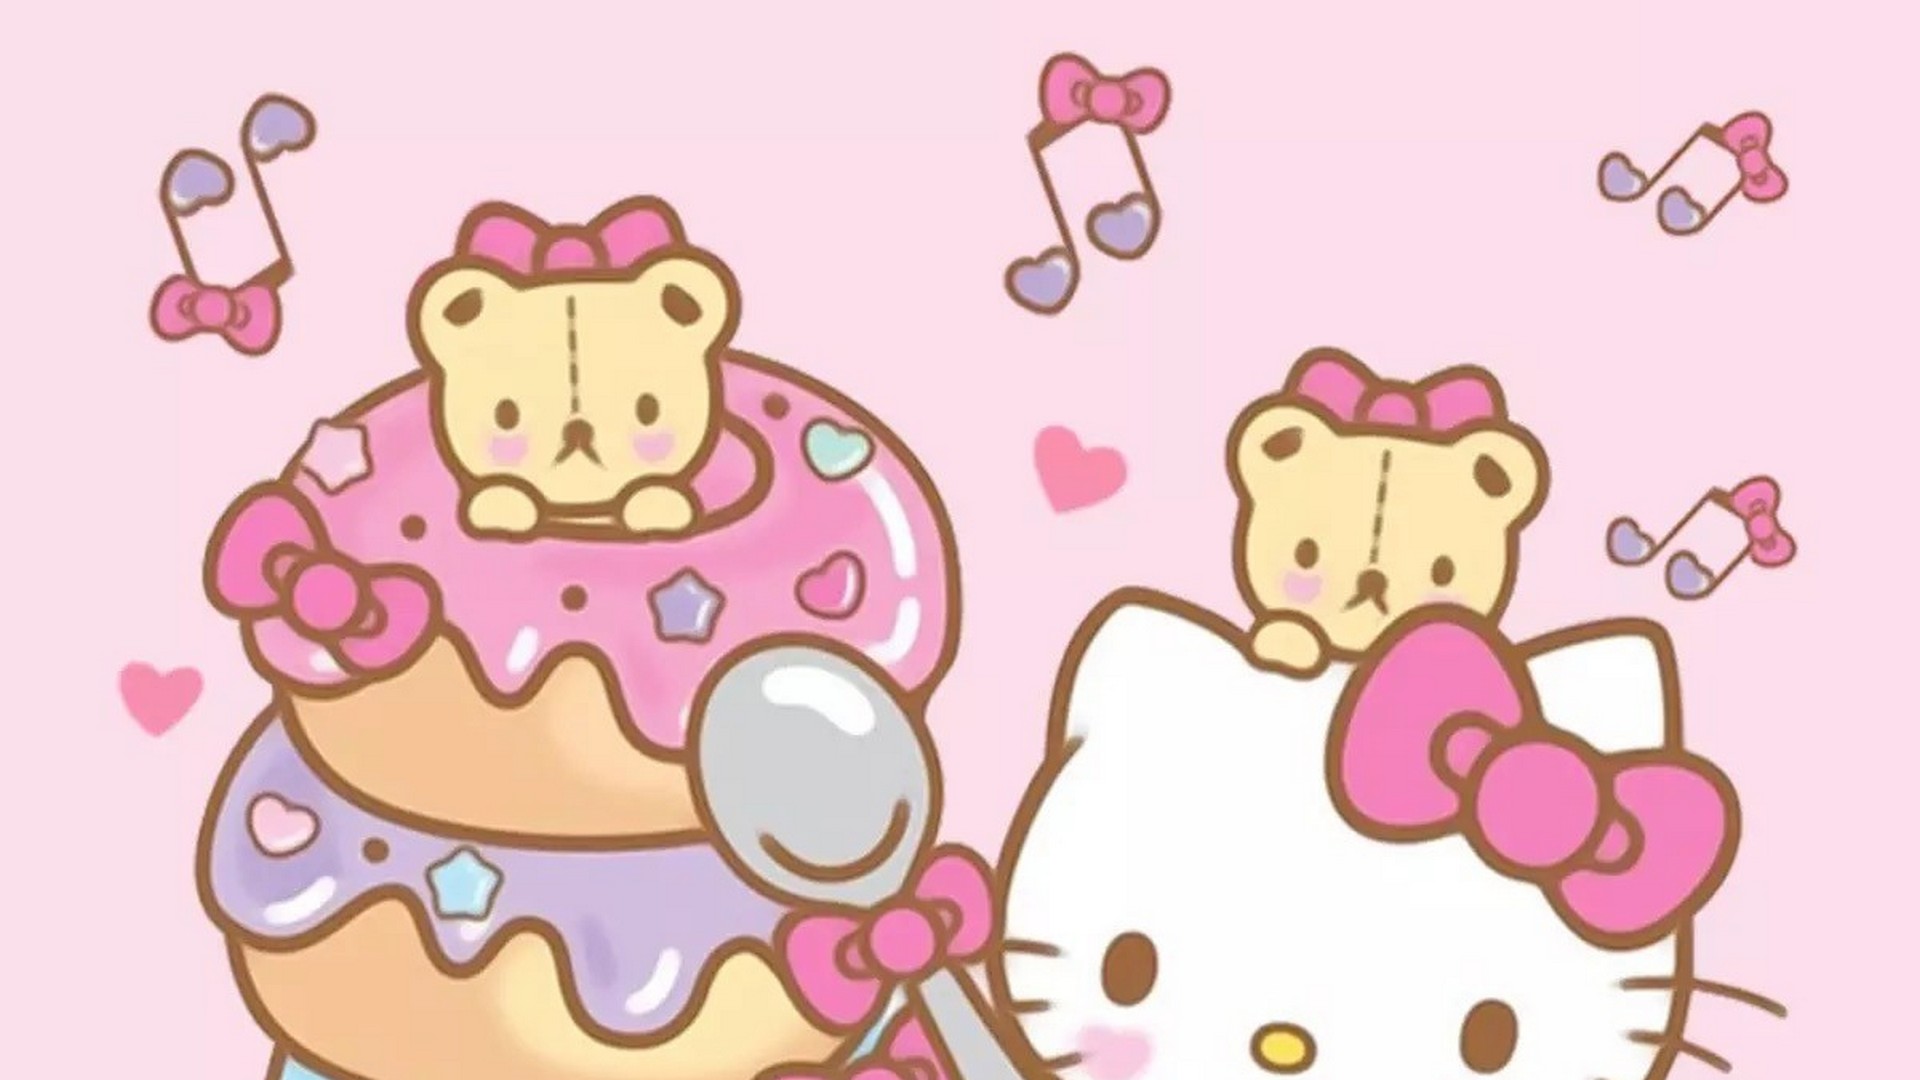 Wallpaper Hello Kitty Pictures HD With Resolution 1920X1080 pixel. You can make this wallpaper for your Desktop Computer Backgrounds, Mac Wallpapers, Android Lock screen or iPhone Screensavers